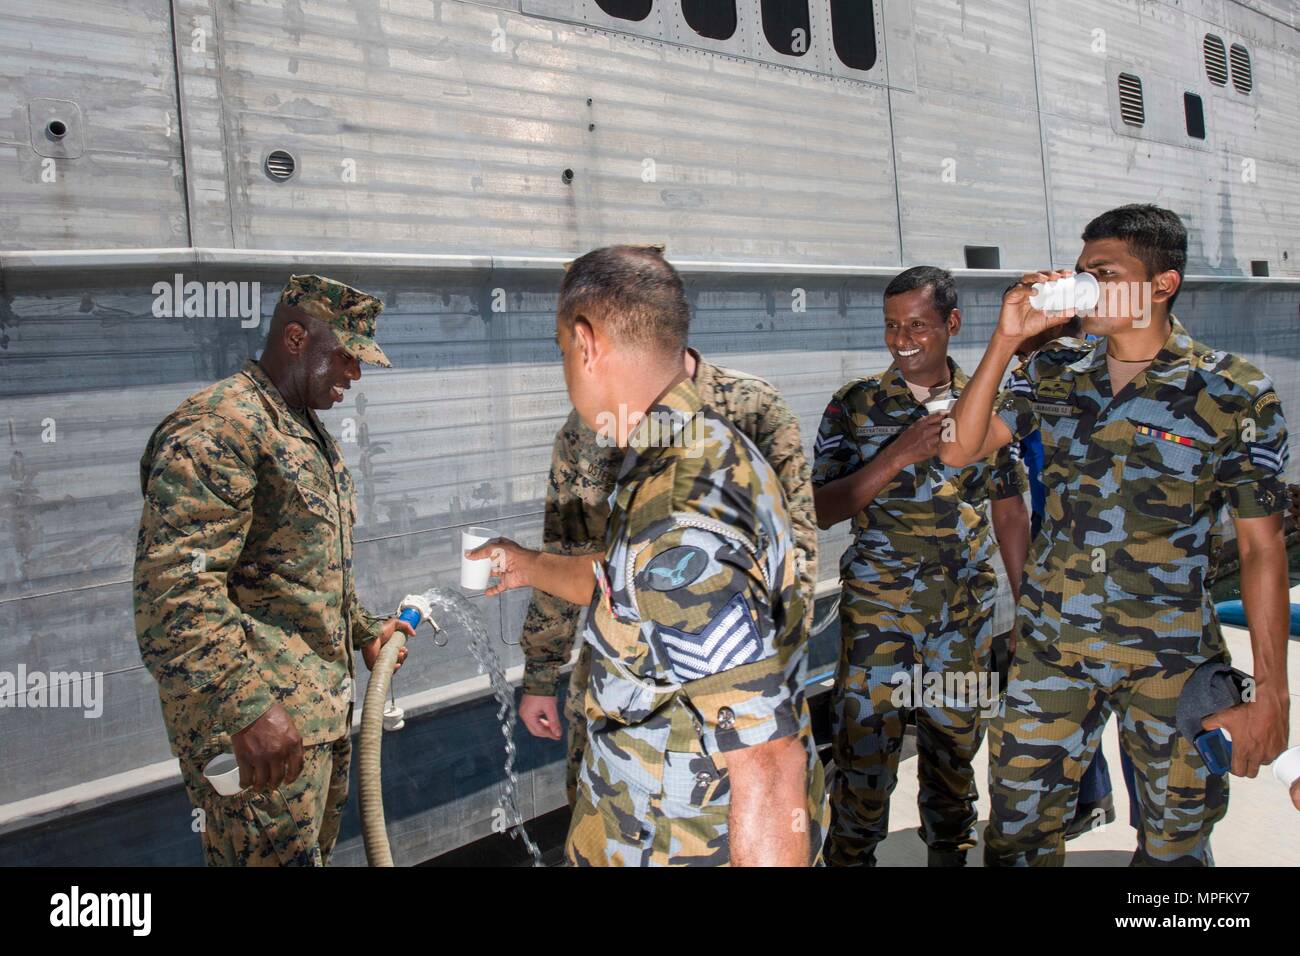 170308-N-SF984-057   HAMBANTOTA, Sri Lanka (March 8, 2017) SSgt. Devario Graham, embarked on USNS Fall River (T-EPF 4) and Sri Lankan military personnel drink purified sea water after conducting water purification training on the pier as part of Pacific Partnership 2017. Pacific Partnership is the largest annual multilateral humanitarian assistance and disaster relief preparedness mission conducted in the Indo-Asia-Pacific and aims to enhance regional coordination in areas such as medical readiness and preparedness for manmade and natural disasters. (U.S. Navy photo by Mass Communication Speci Stock Photo